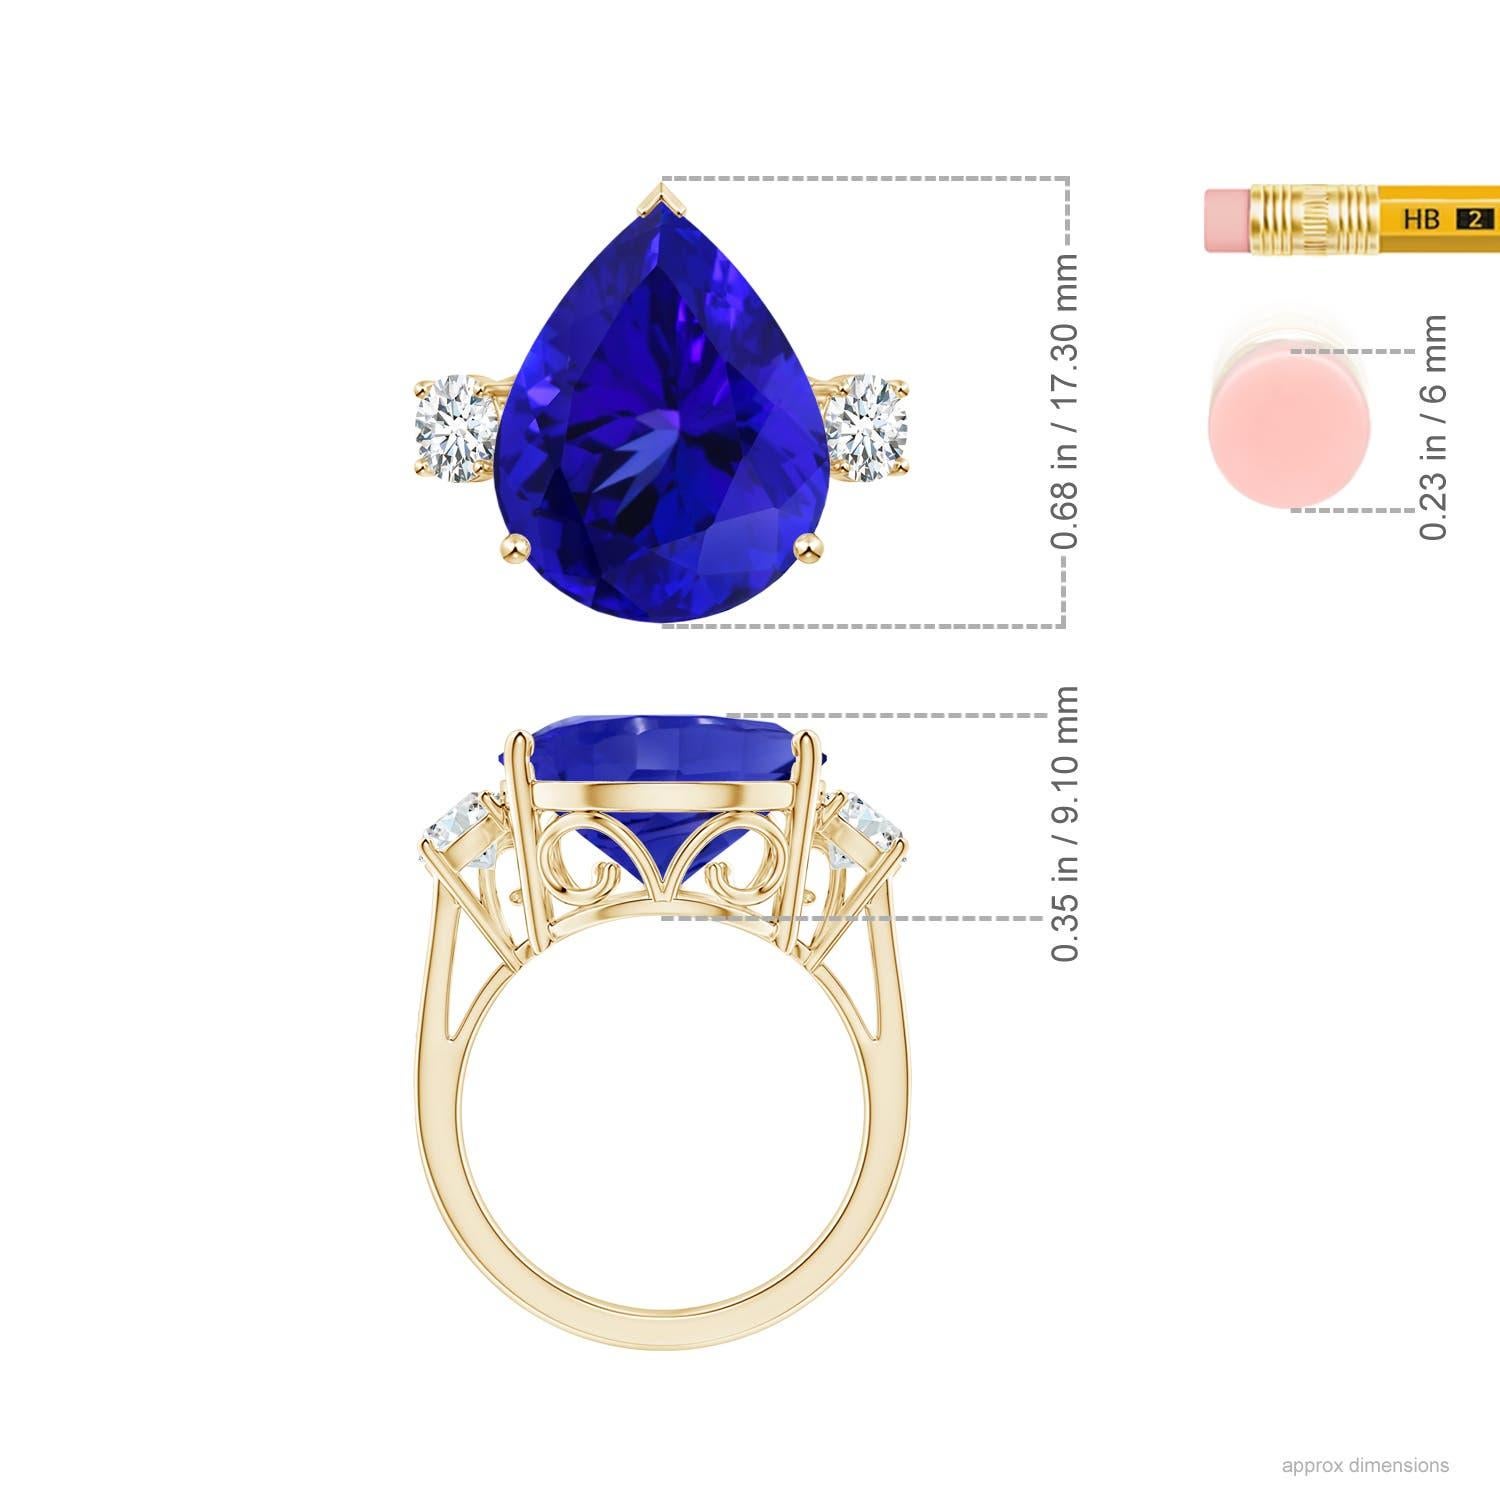 For Sale:  Angara Gia Certified Natural Tanzanite Ring in Yellow Gold with Diamonds 5